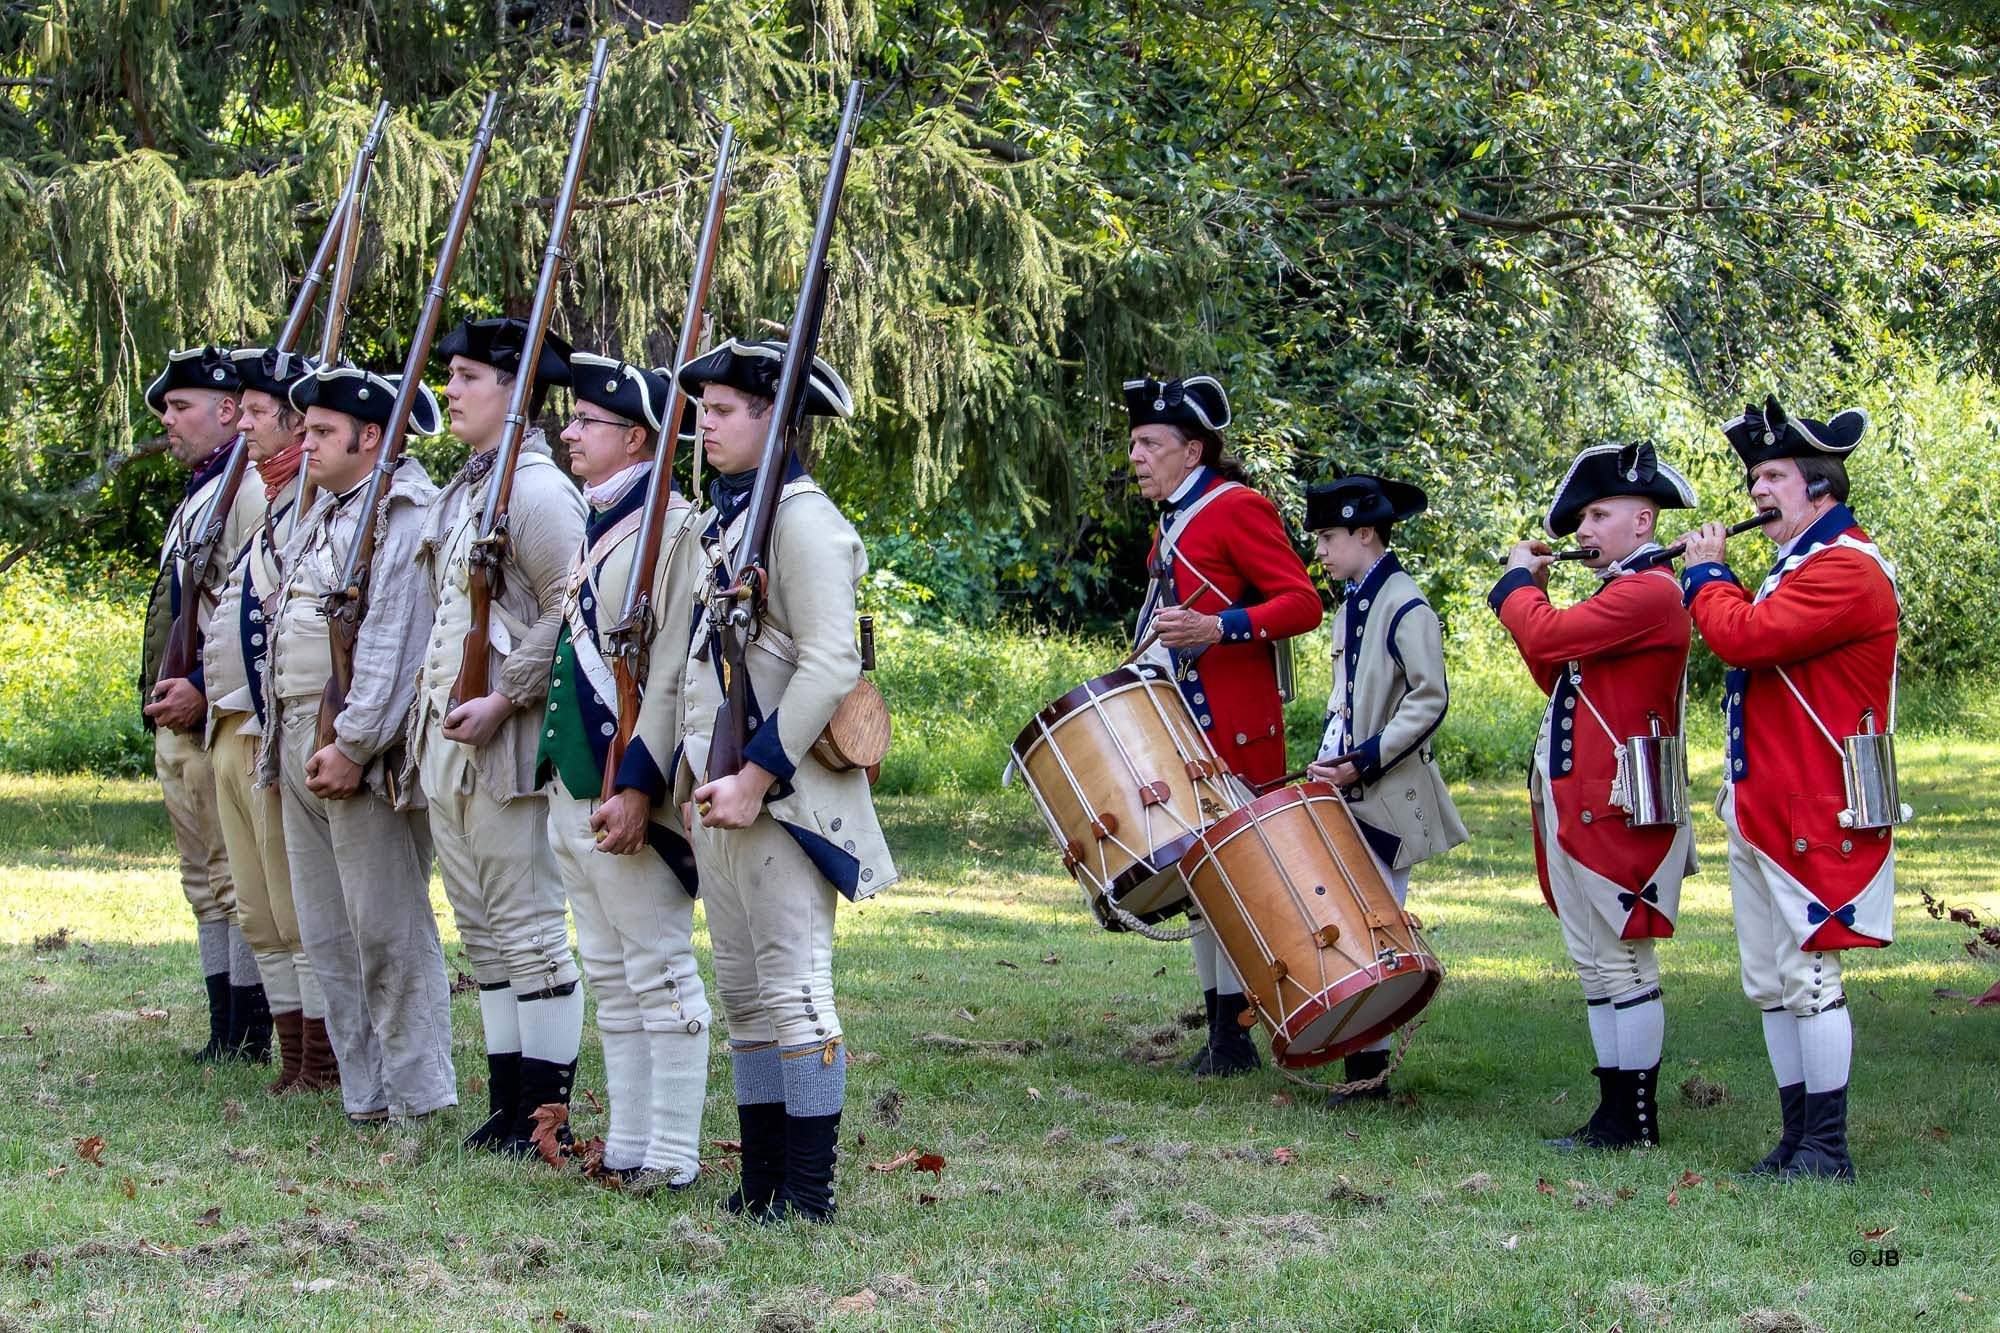 With the 1st NJ Regiment